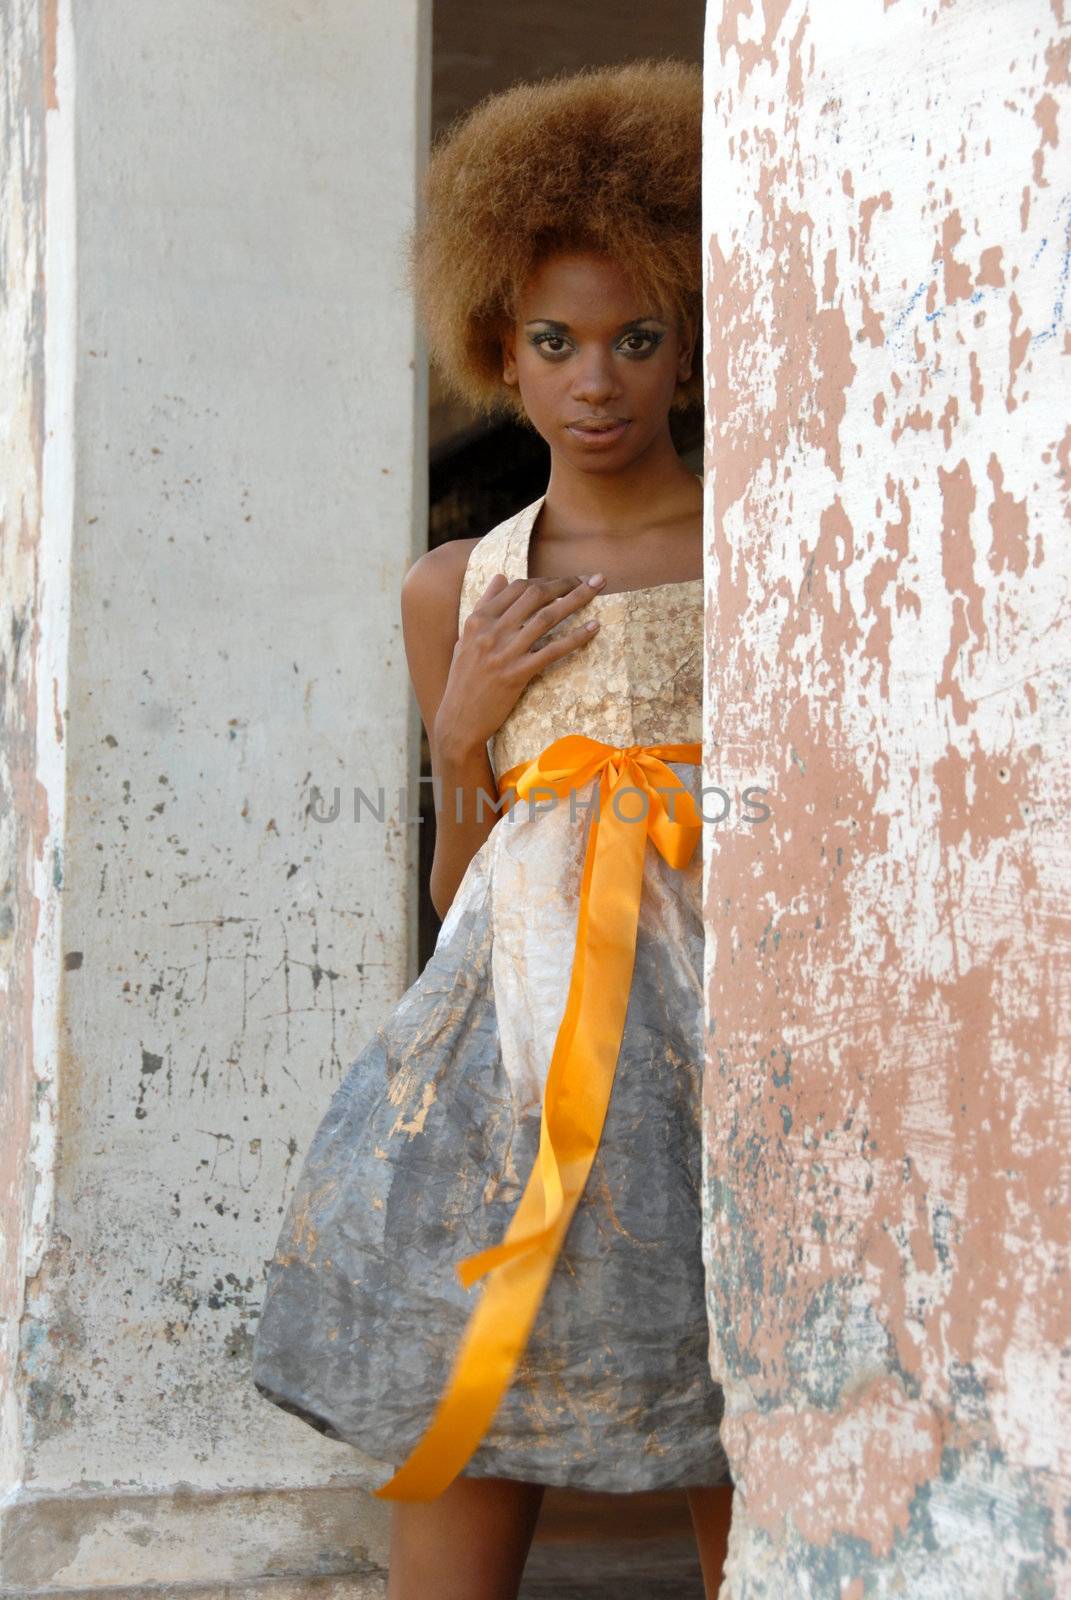 Cuban woman by africa